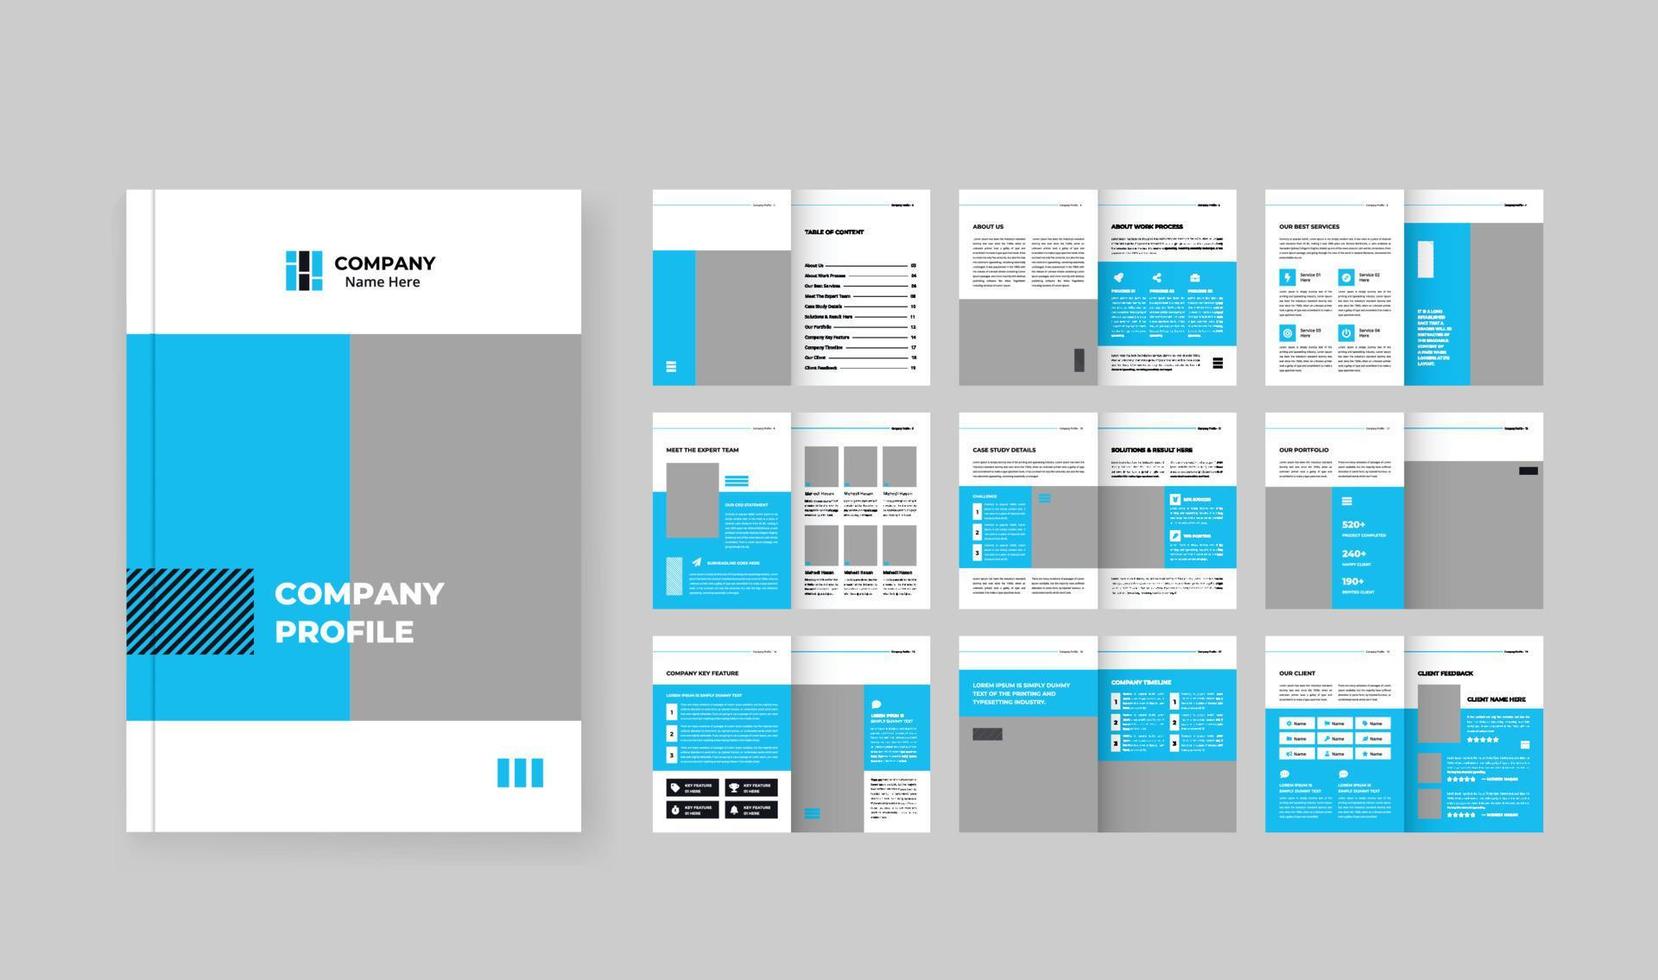 Design company profile, vector template brochures, flyers, presentations, leaflet, white paper, catalog, magazine a4 size. Dark grey and blue geometric elements on a white background